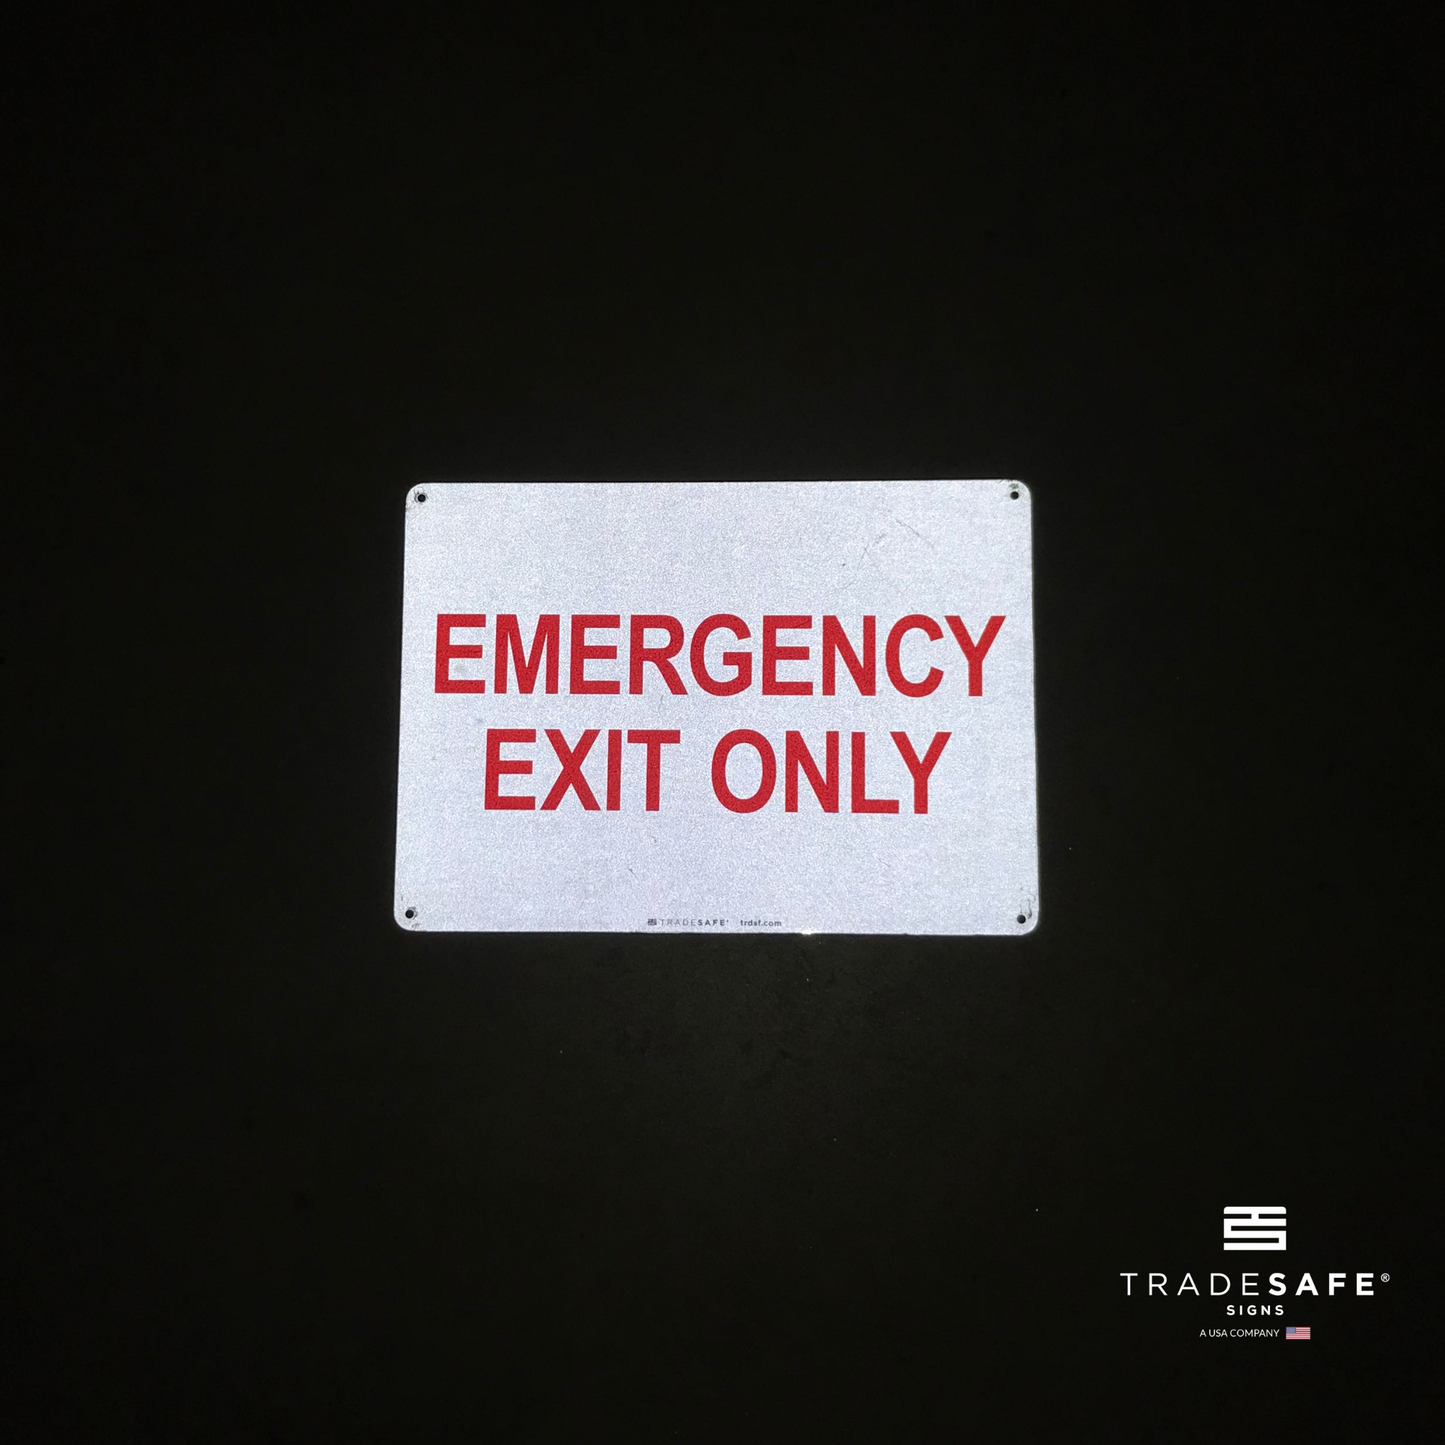 reflective attribute of emergency exit only sign on black background